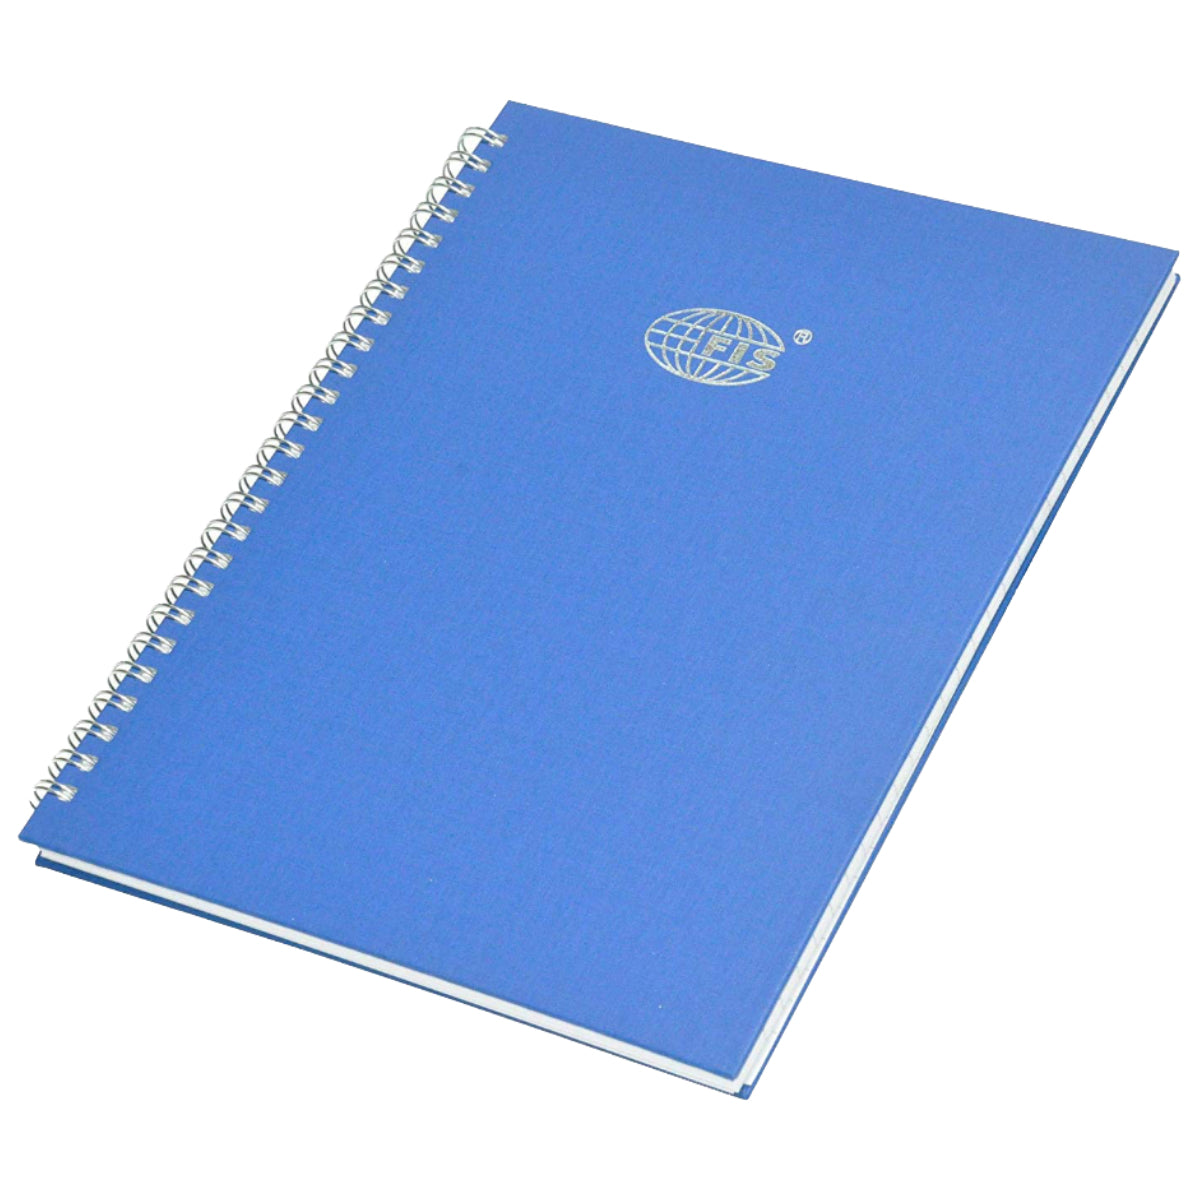 FIS Ruled Manuscript/Register Book with side spiral binding, A4, 2QR - 96 sheets, Blue